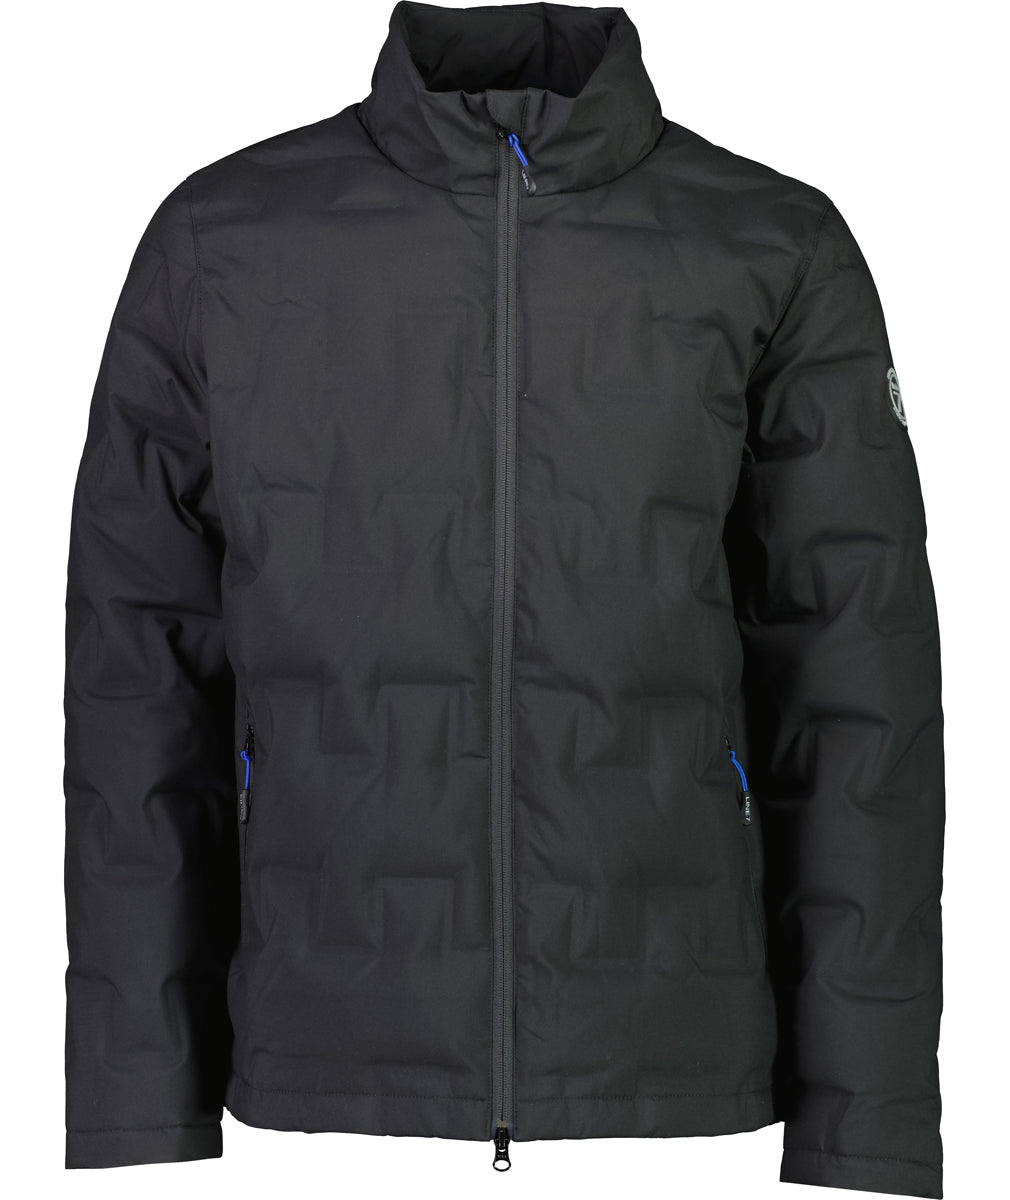 Line 7 Mens Ballast Insulated Down Jacket - Black